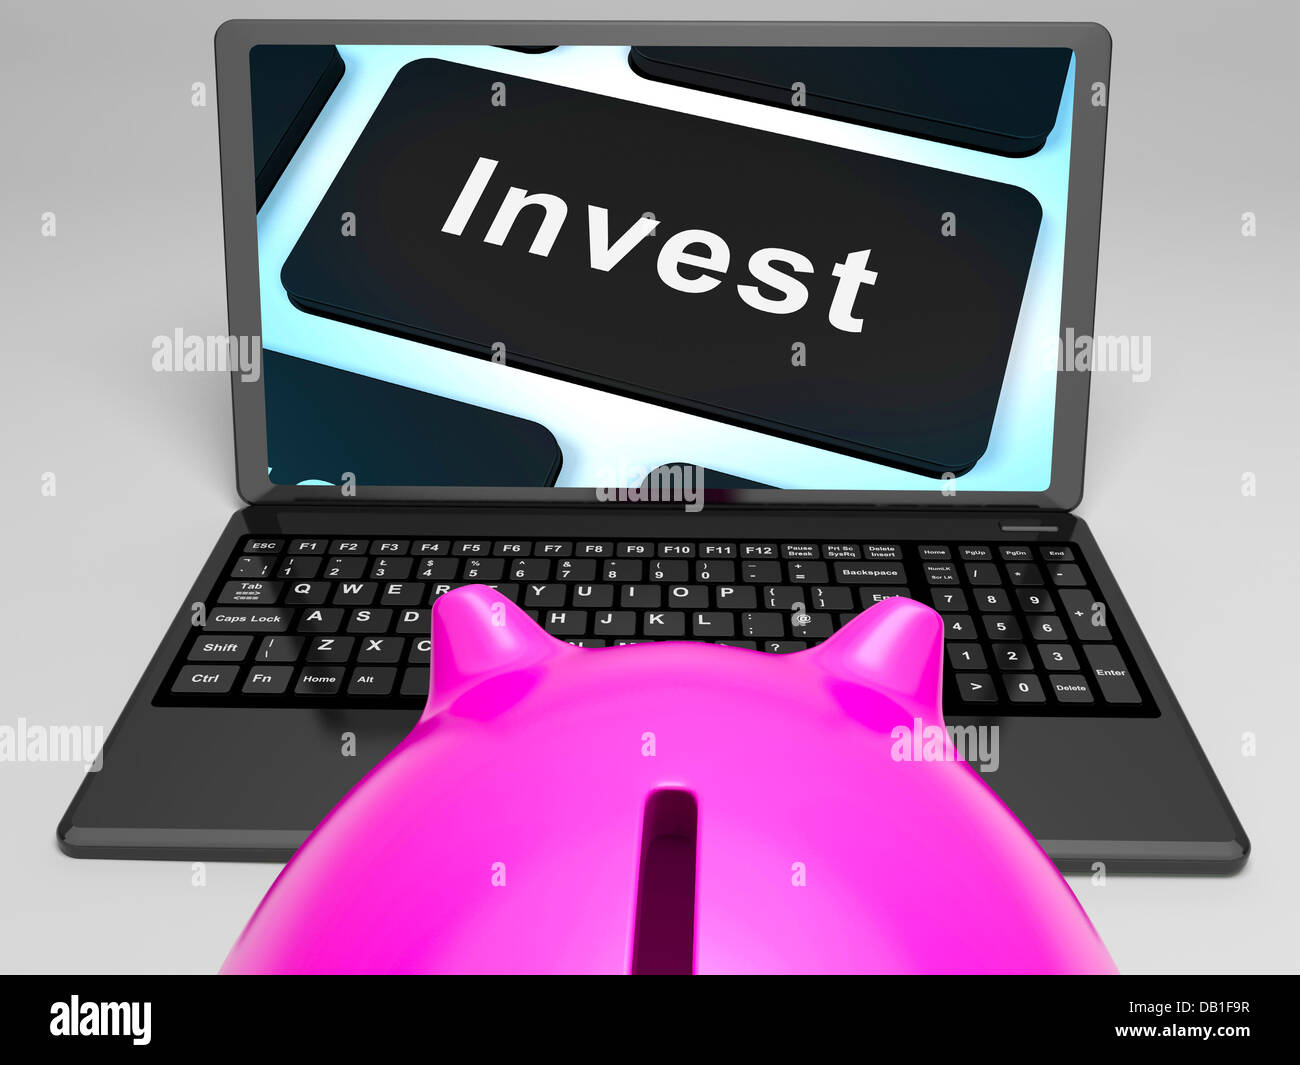 Invest Key On Laptop Showing Investment Market Stock Photo